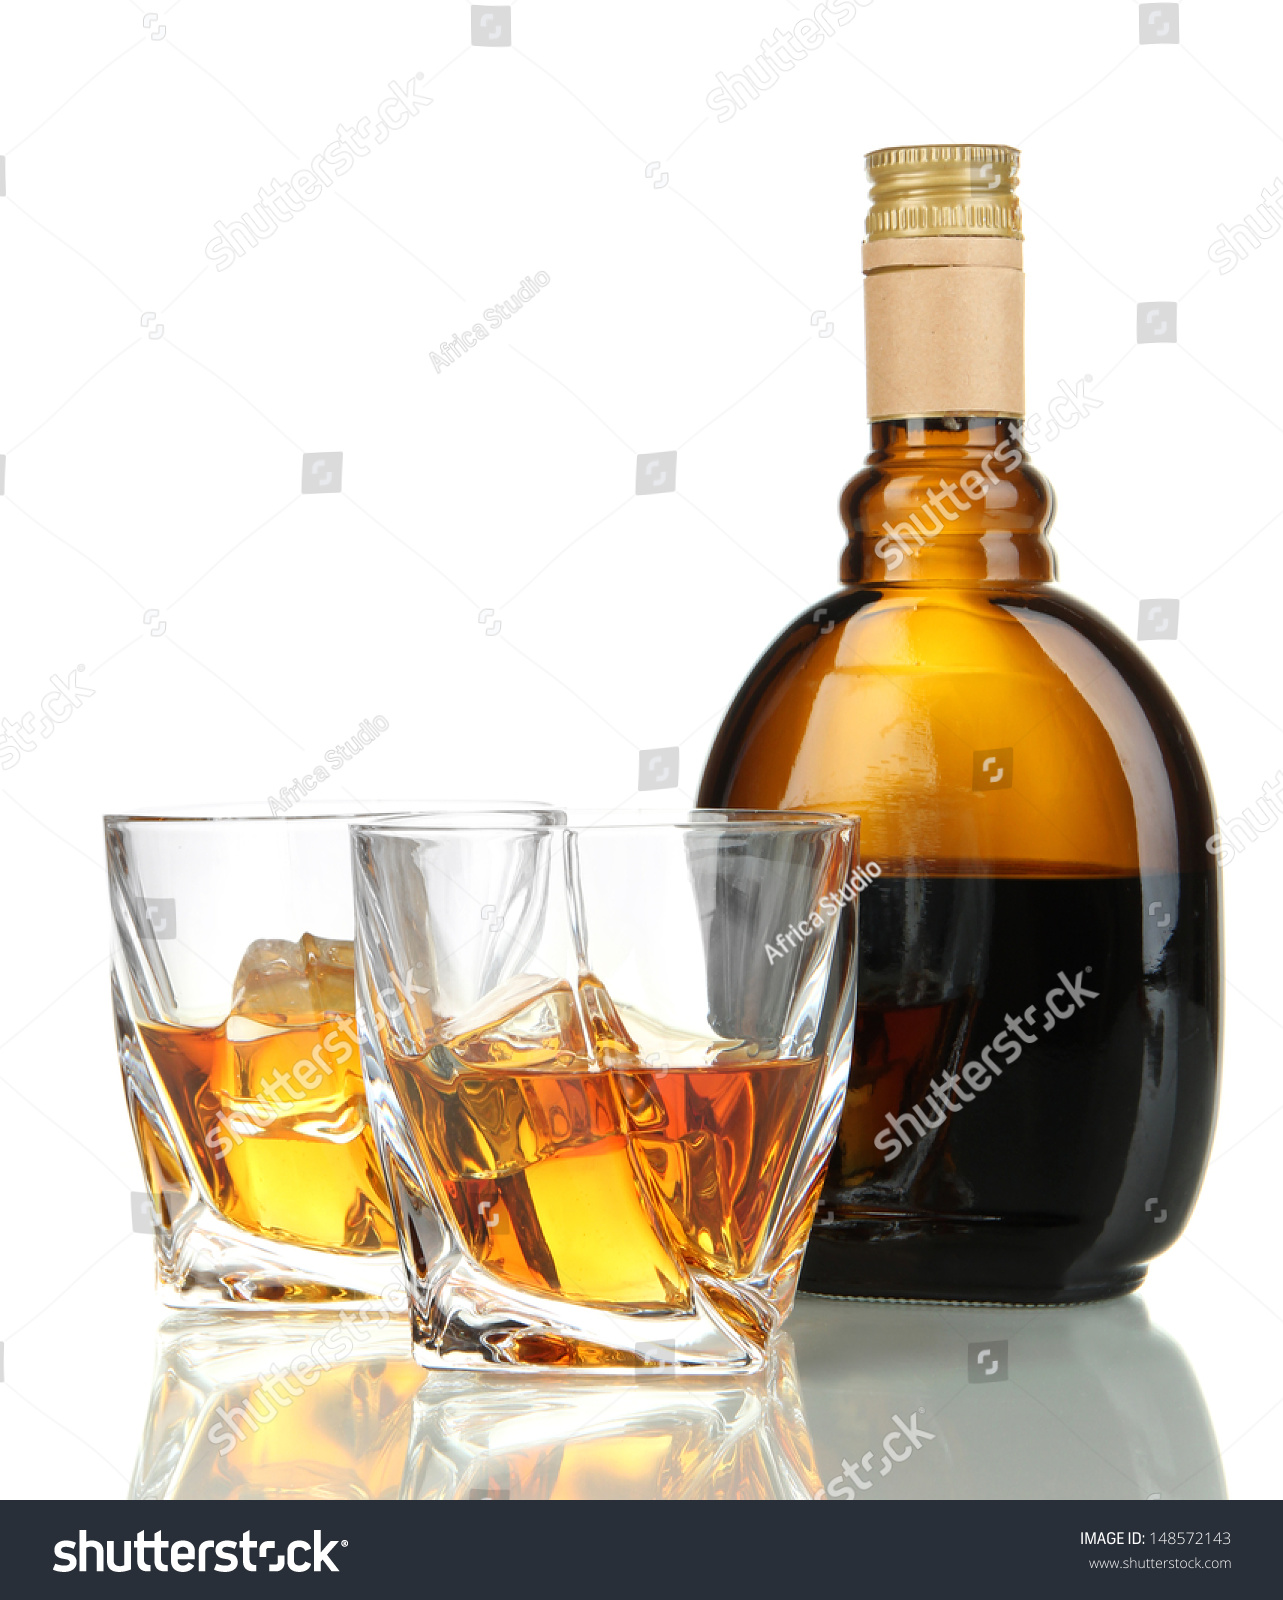 Glasses of whiskey with bottle, isolated on white #148572143